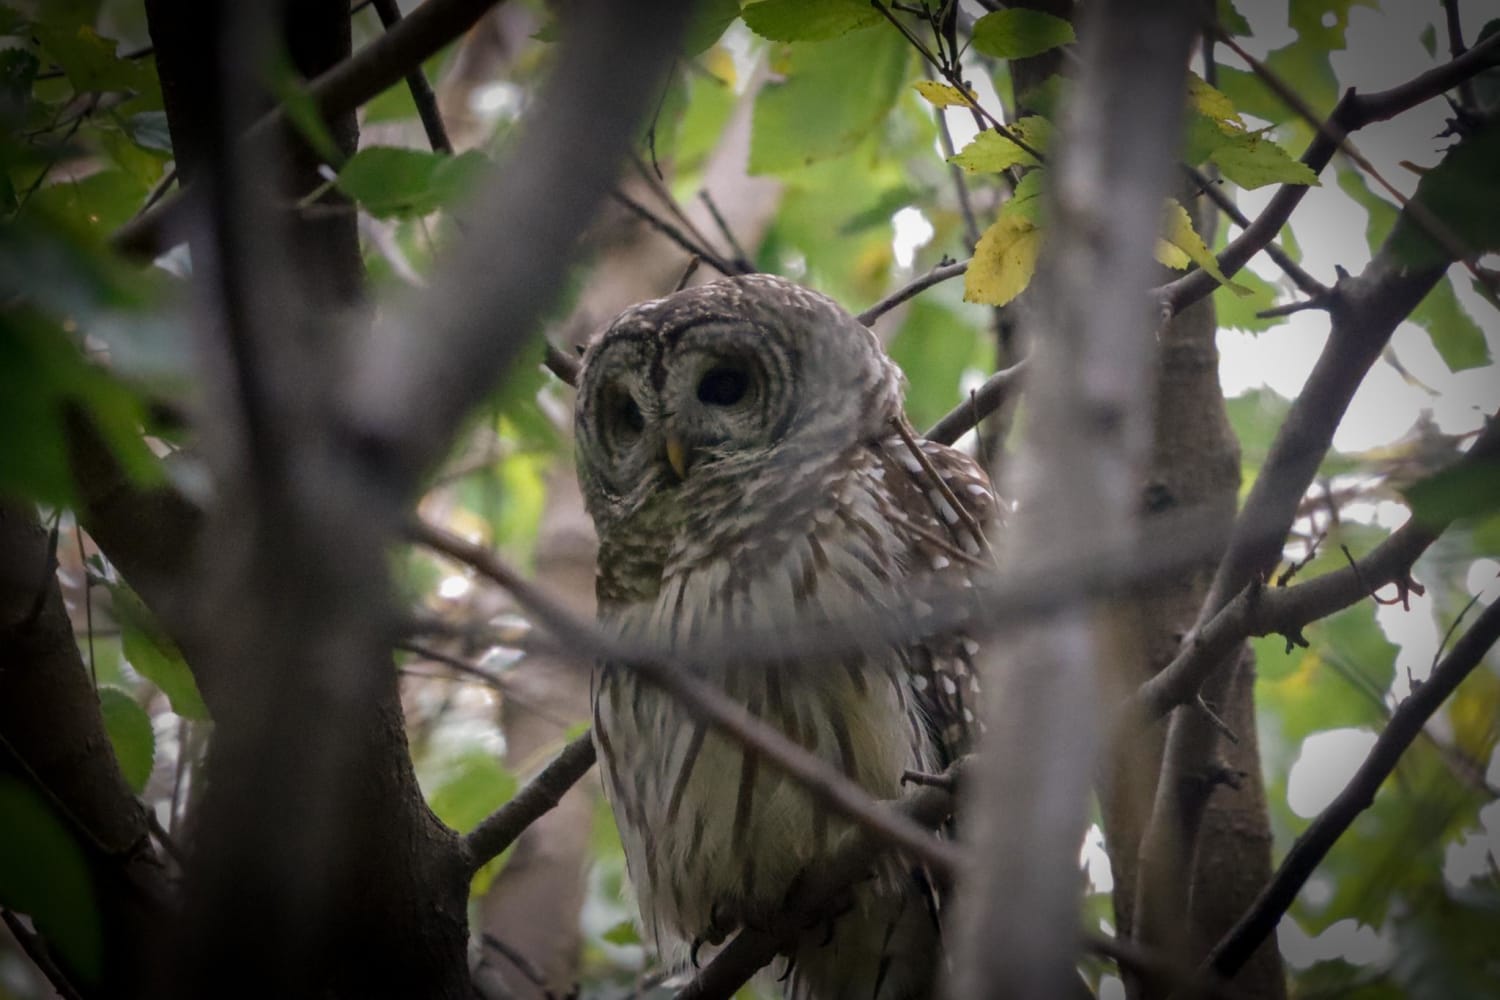 Got to see this gorgeous Barred Owl a couple days back.